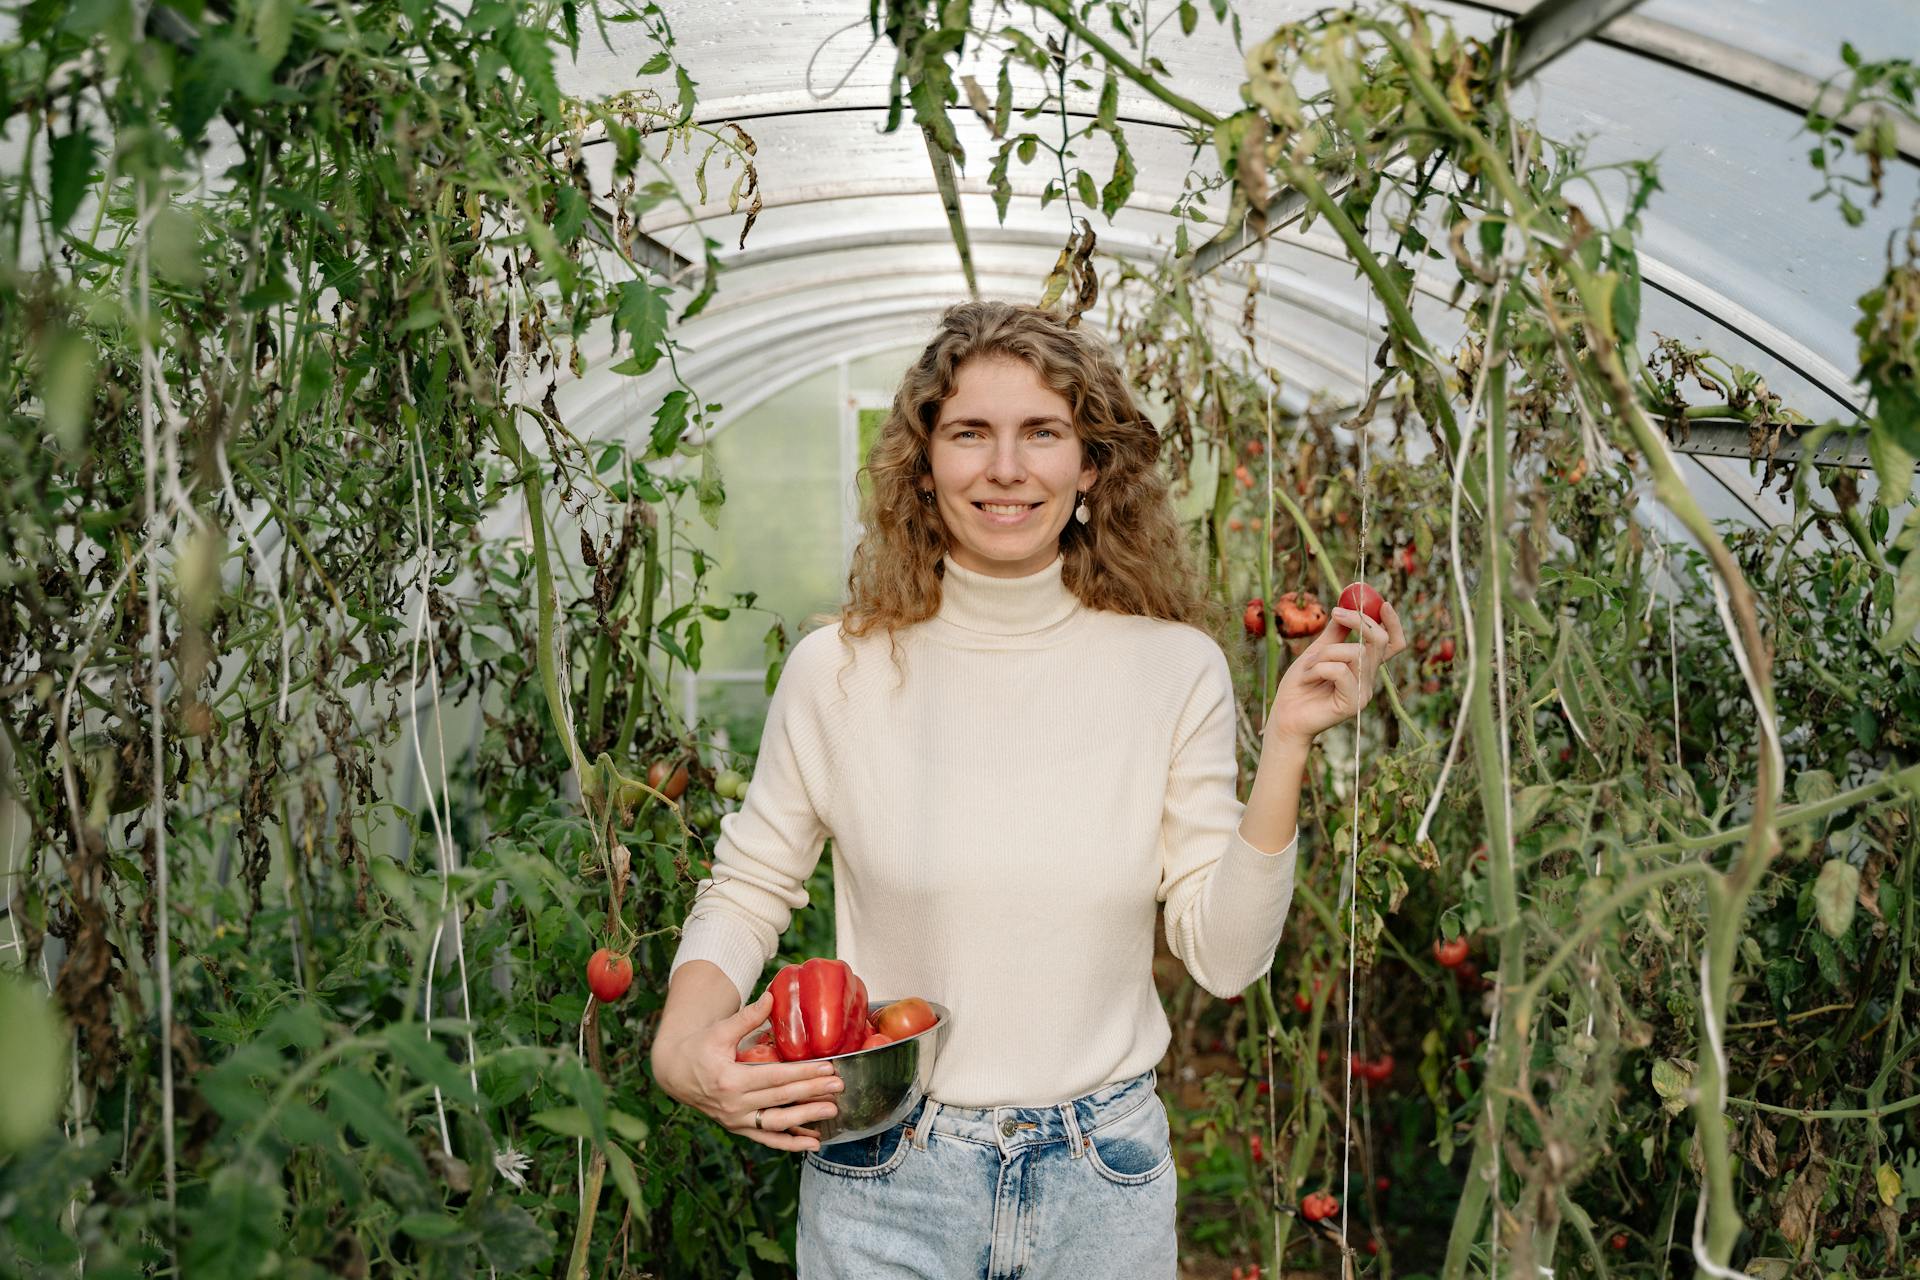 A Woman Harvesting Crops Inside a Greenhouse